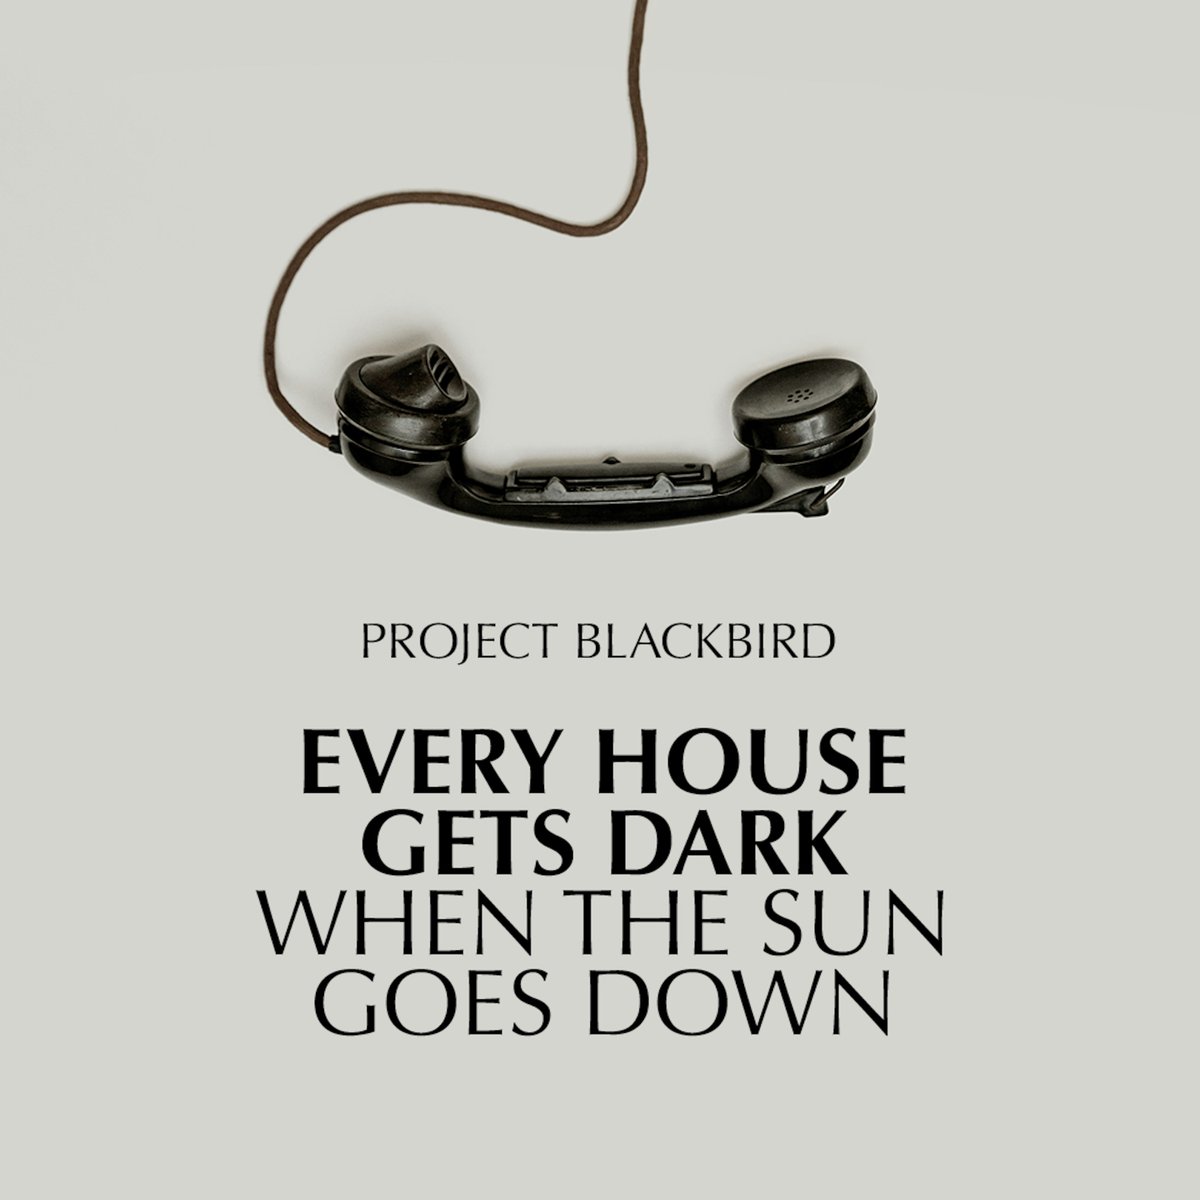 #LatestRelease @ProjBlackMusic new single “Every House Gets Dark When the Sun Goes Down” to be released on 24th May! The second single from their forthcoming album, ‘True Names’. #NewMusicFriday #promotion